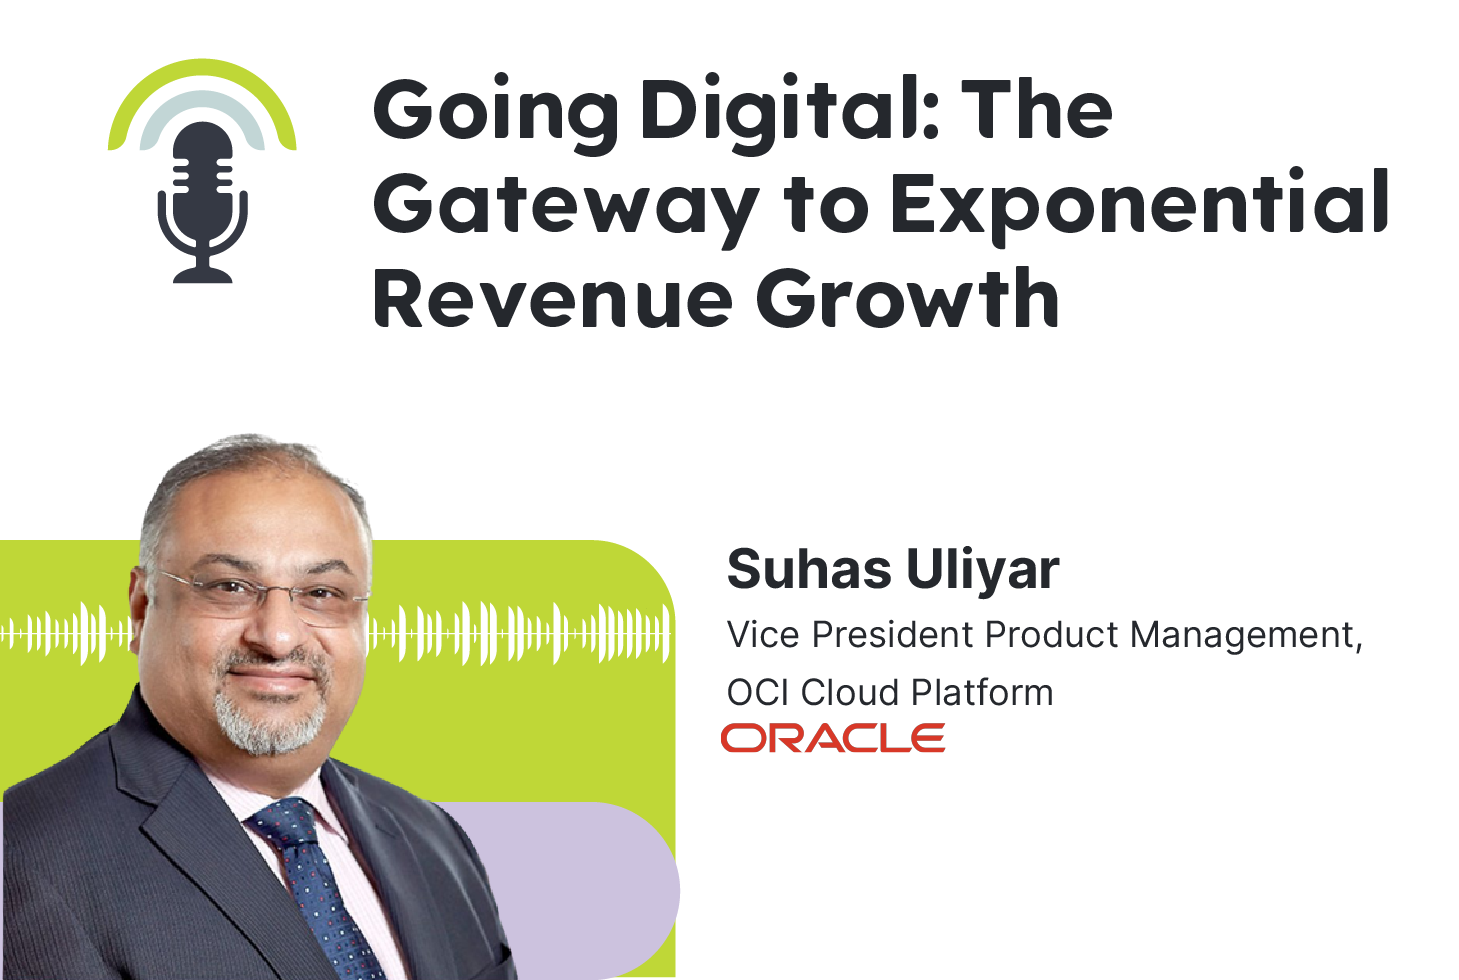 Going Digital: The Gateway to Exponential Revenue Growth